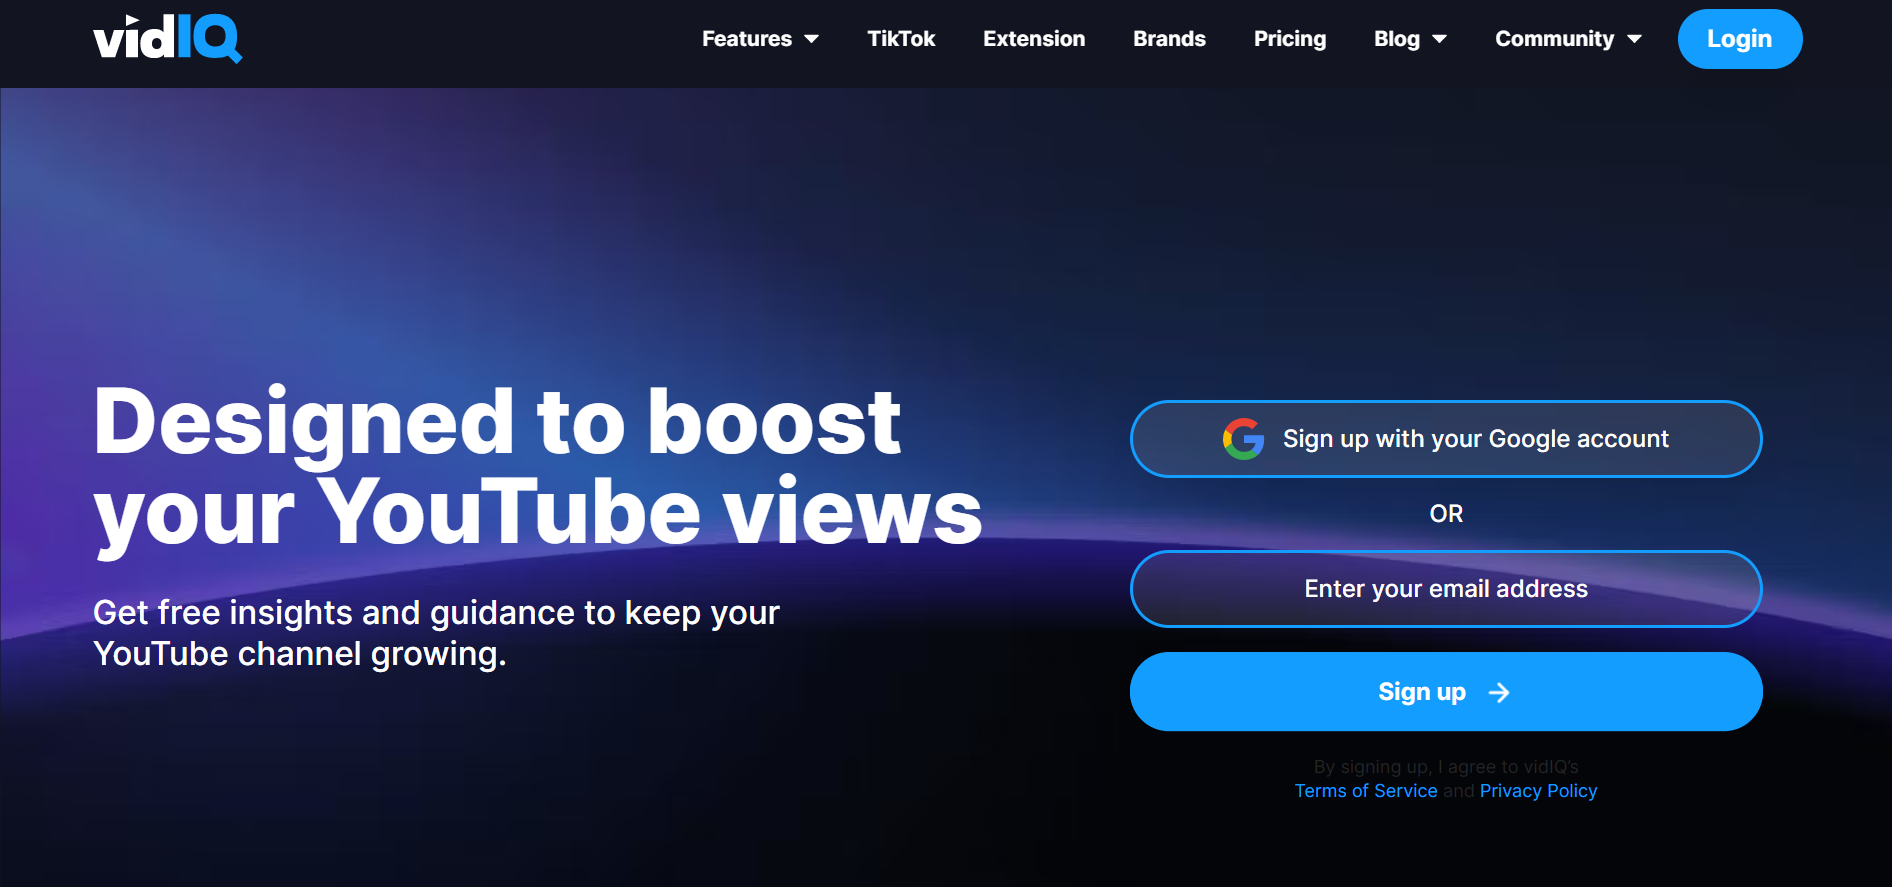 Take Your YouTube Channel to the Next Level with VidIQ.com: The Ultimate Video Optimization Tool!